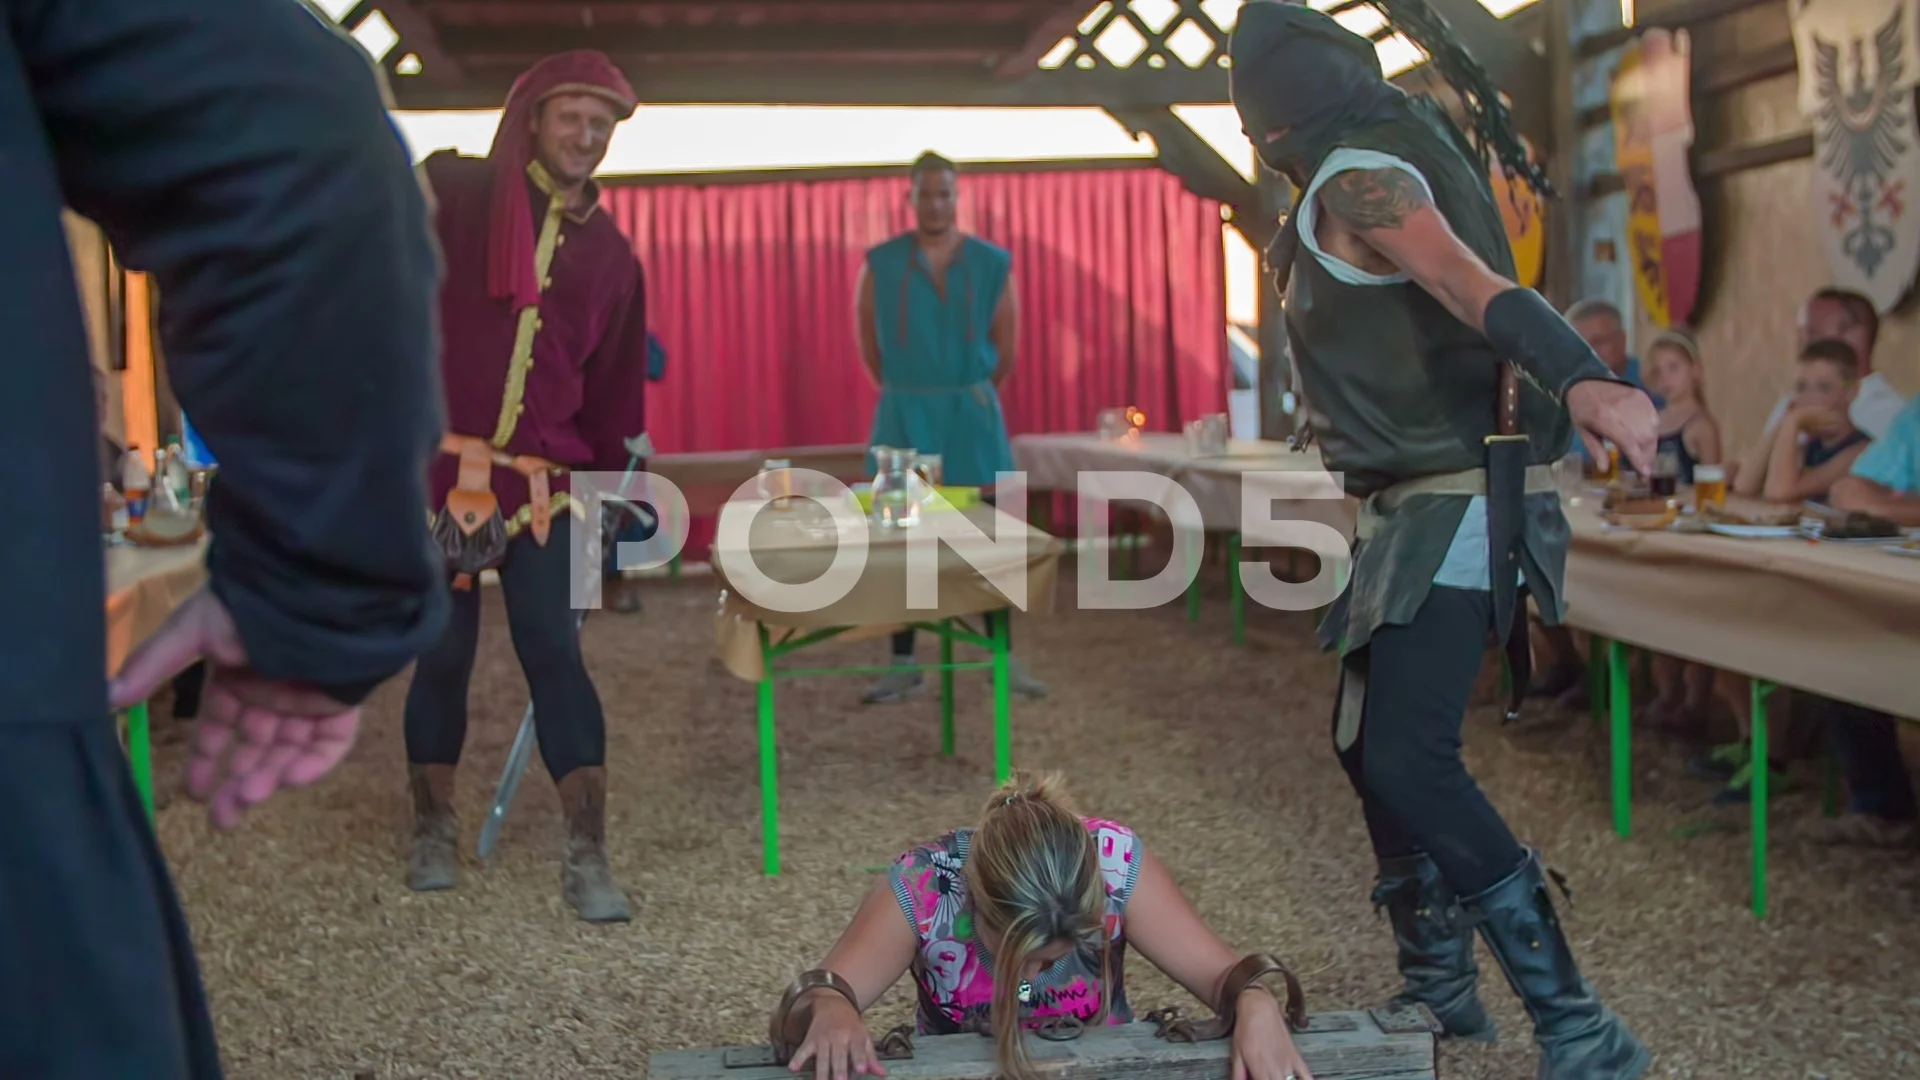 https://images.pond5.com/woman-being-whipped-footage-070050487_prevstill.jpeg